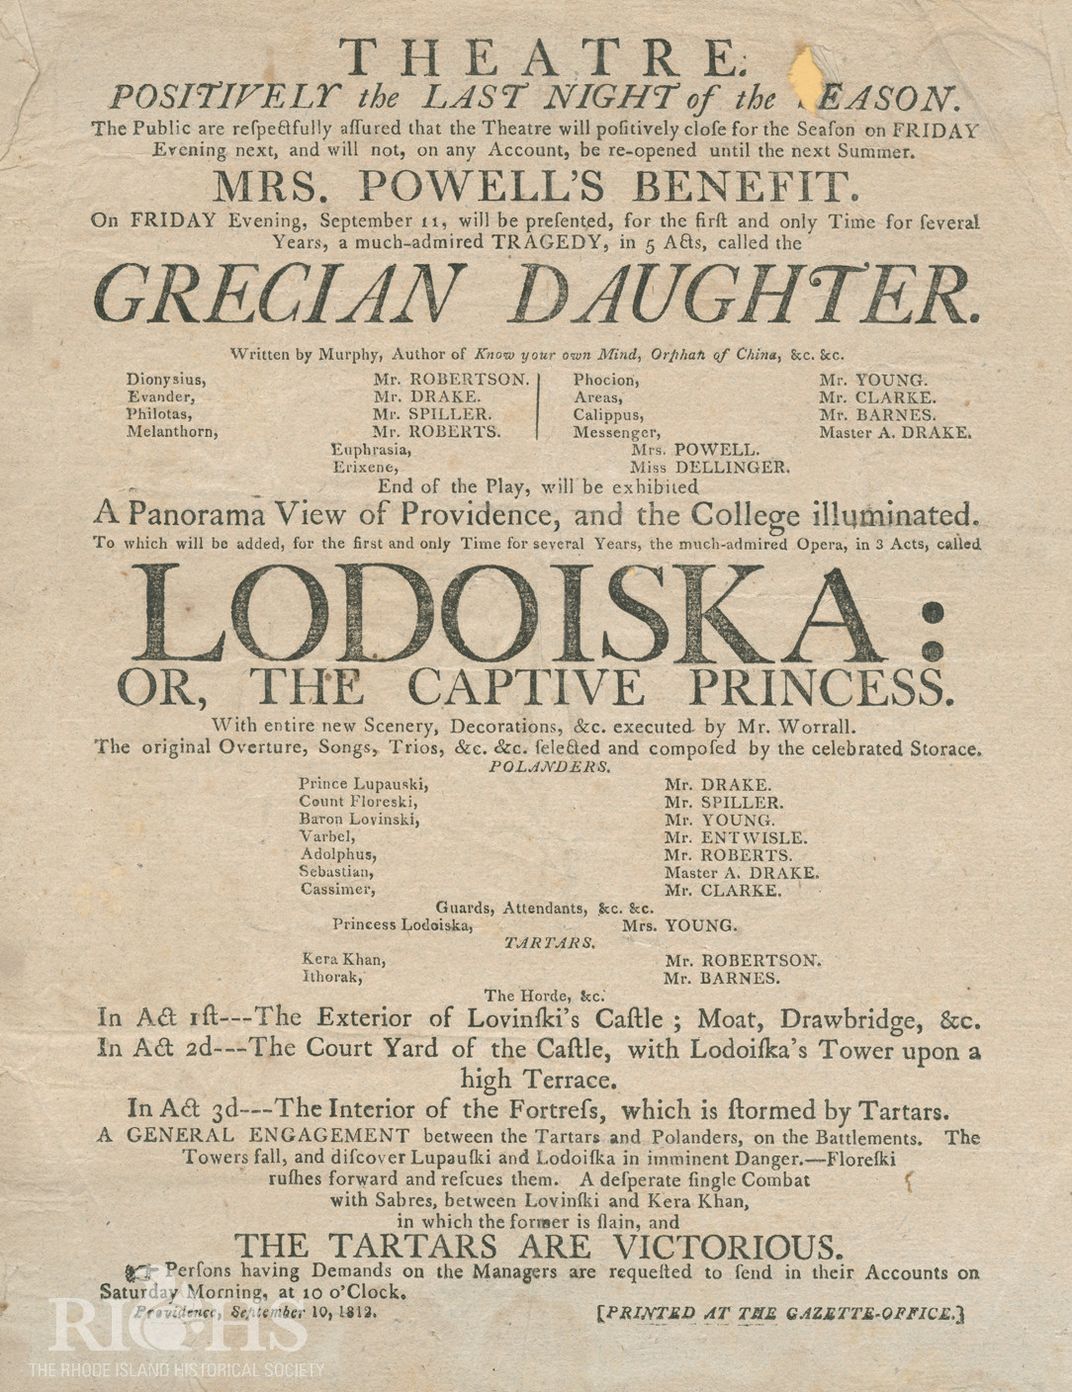 1812 pamphlet mentioning the drop scene